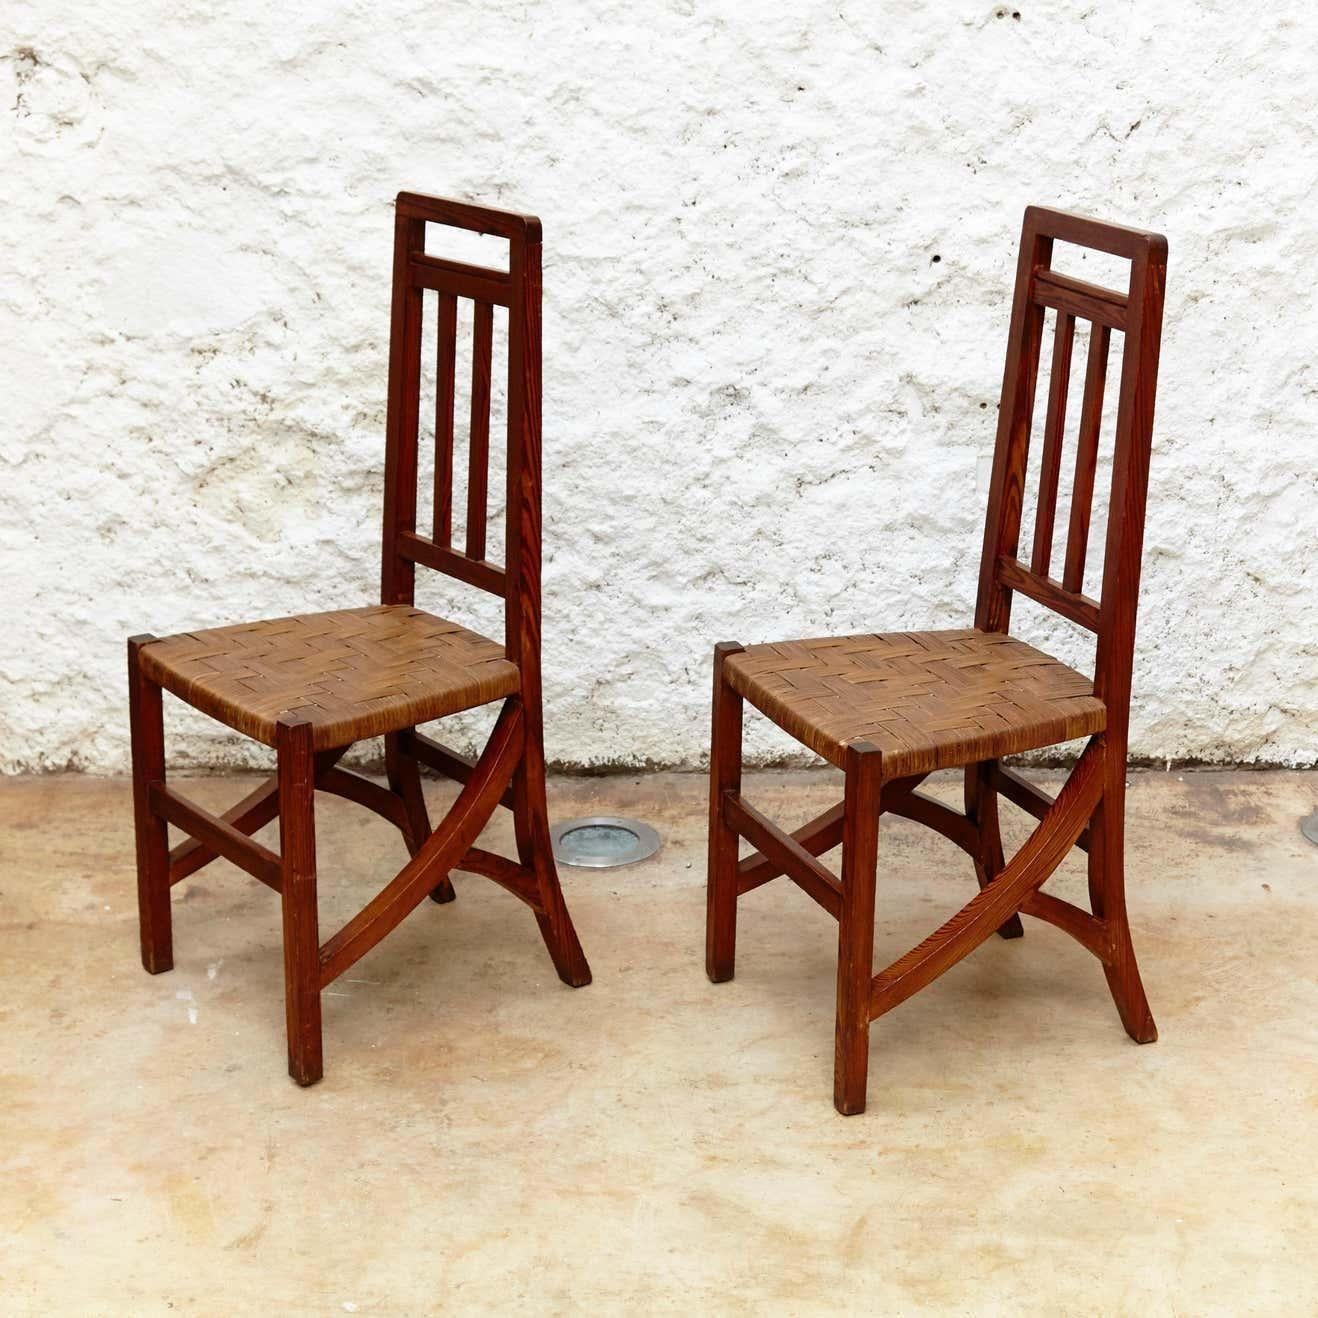 Set of two Arts & Crafts chairs in wood and rattan, circa 1910
By unknown designer and manufacturer.
Manufactured in Spain, circa 1910.
Wood and rattan.

In original condition with minor wear consistent of age and use, preserving a beautiful patina.